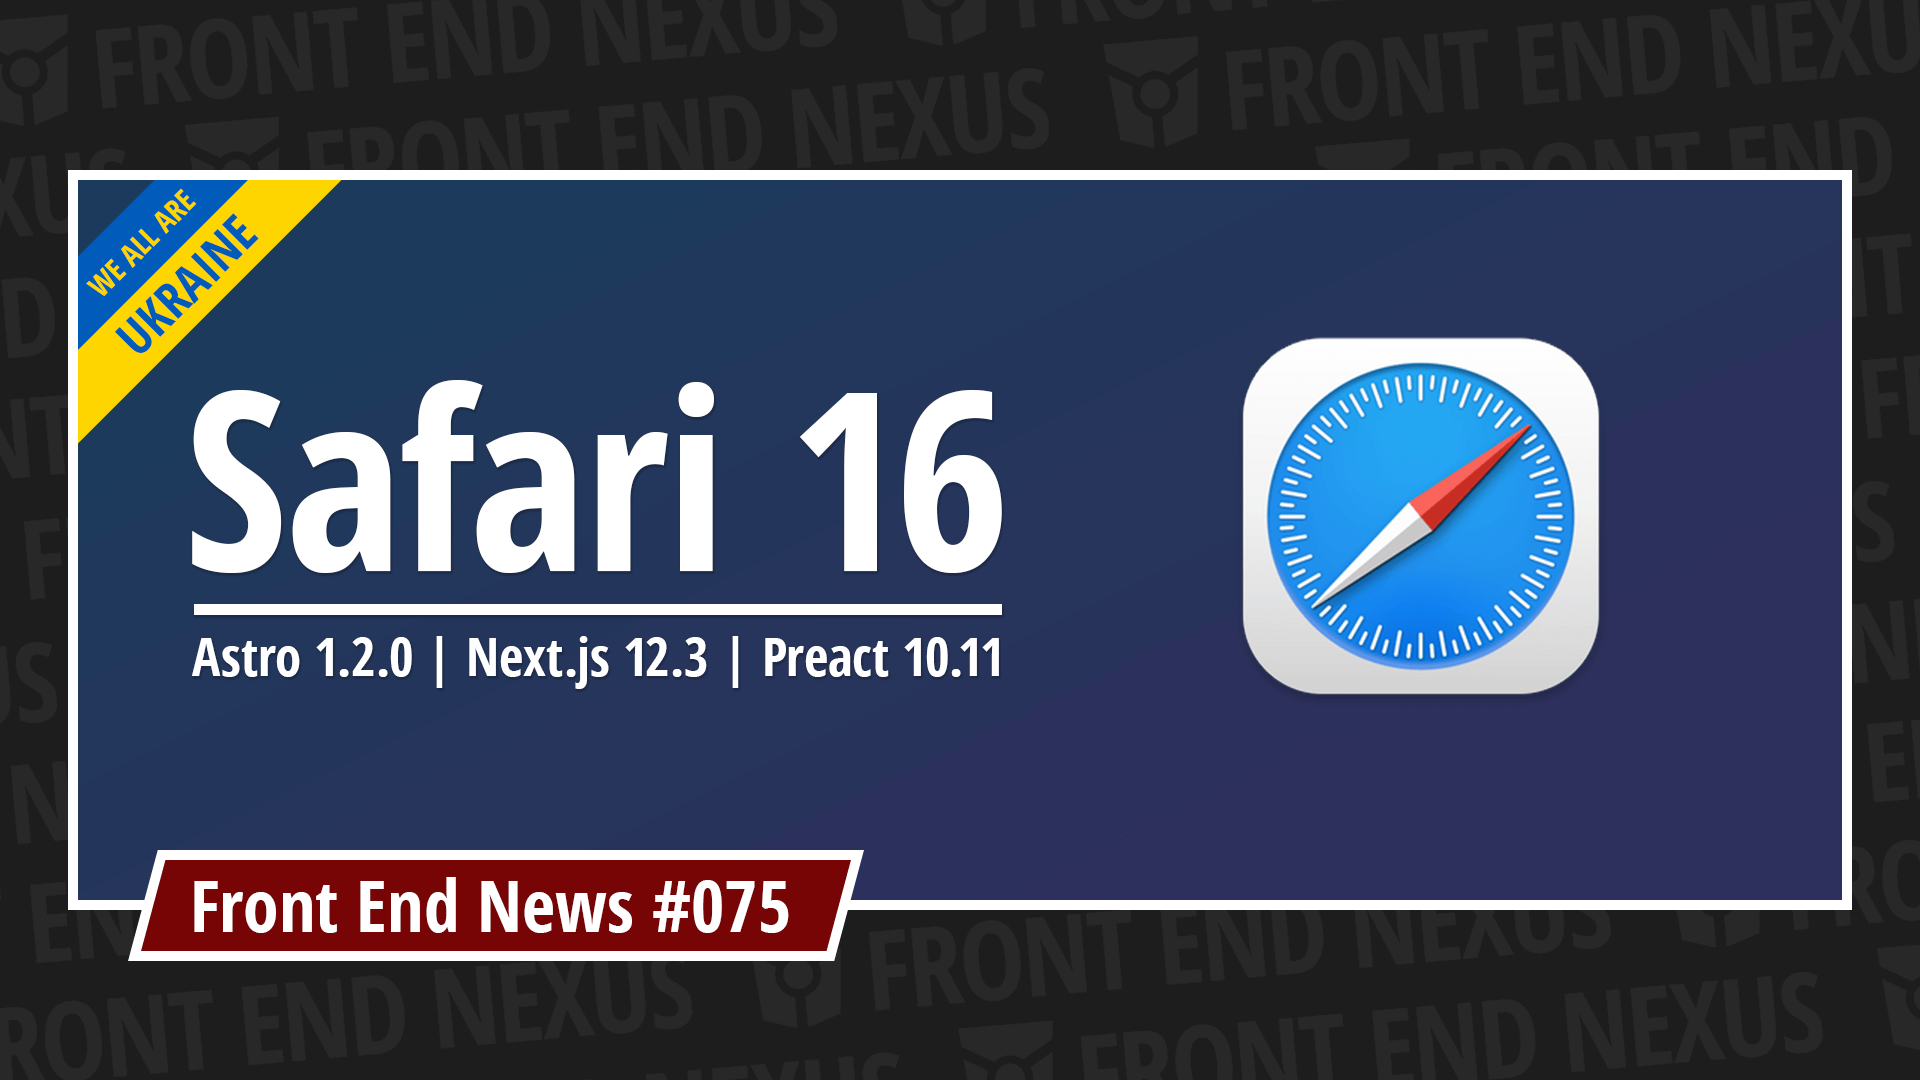 Safari 16.0 is out, Astro 1.2.0, Next.js 12.3, Preact 10.11, and more | Front End News #075